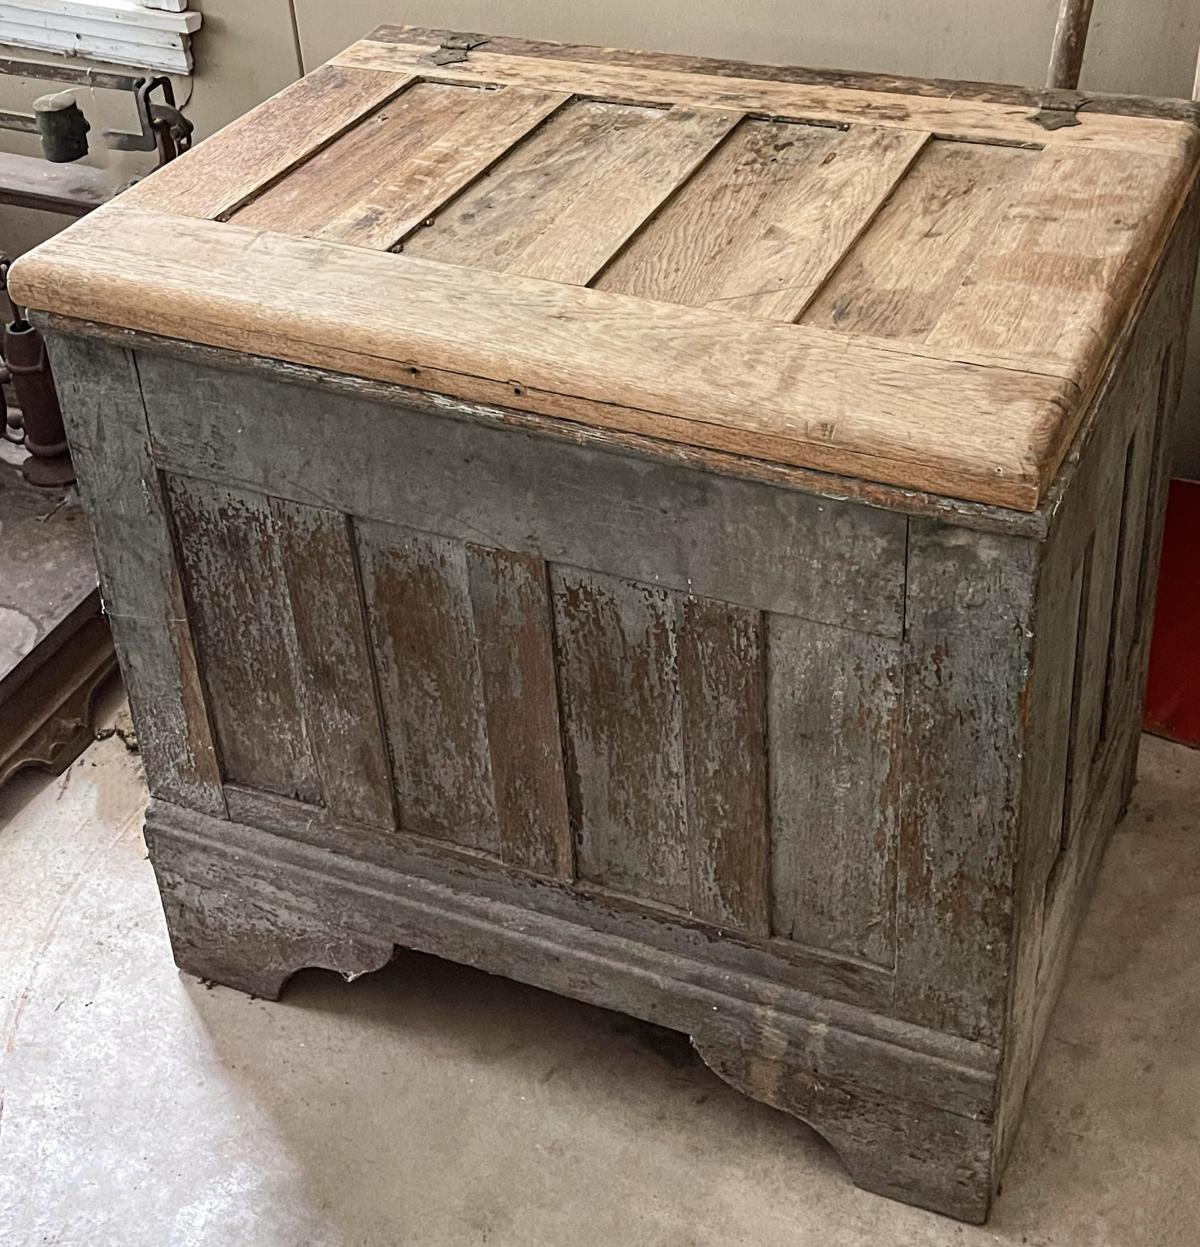 ANTIQUE OAK LIFT TOP ICE BOX IN OLD PAINT